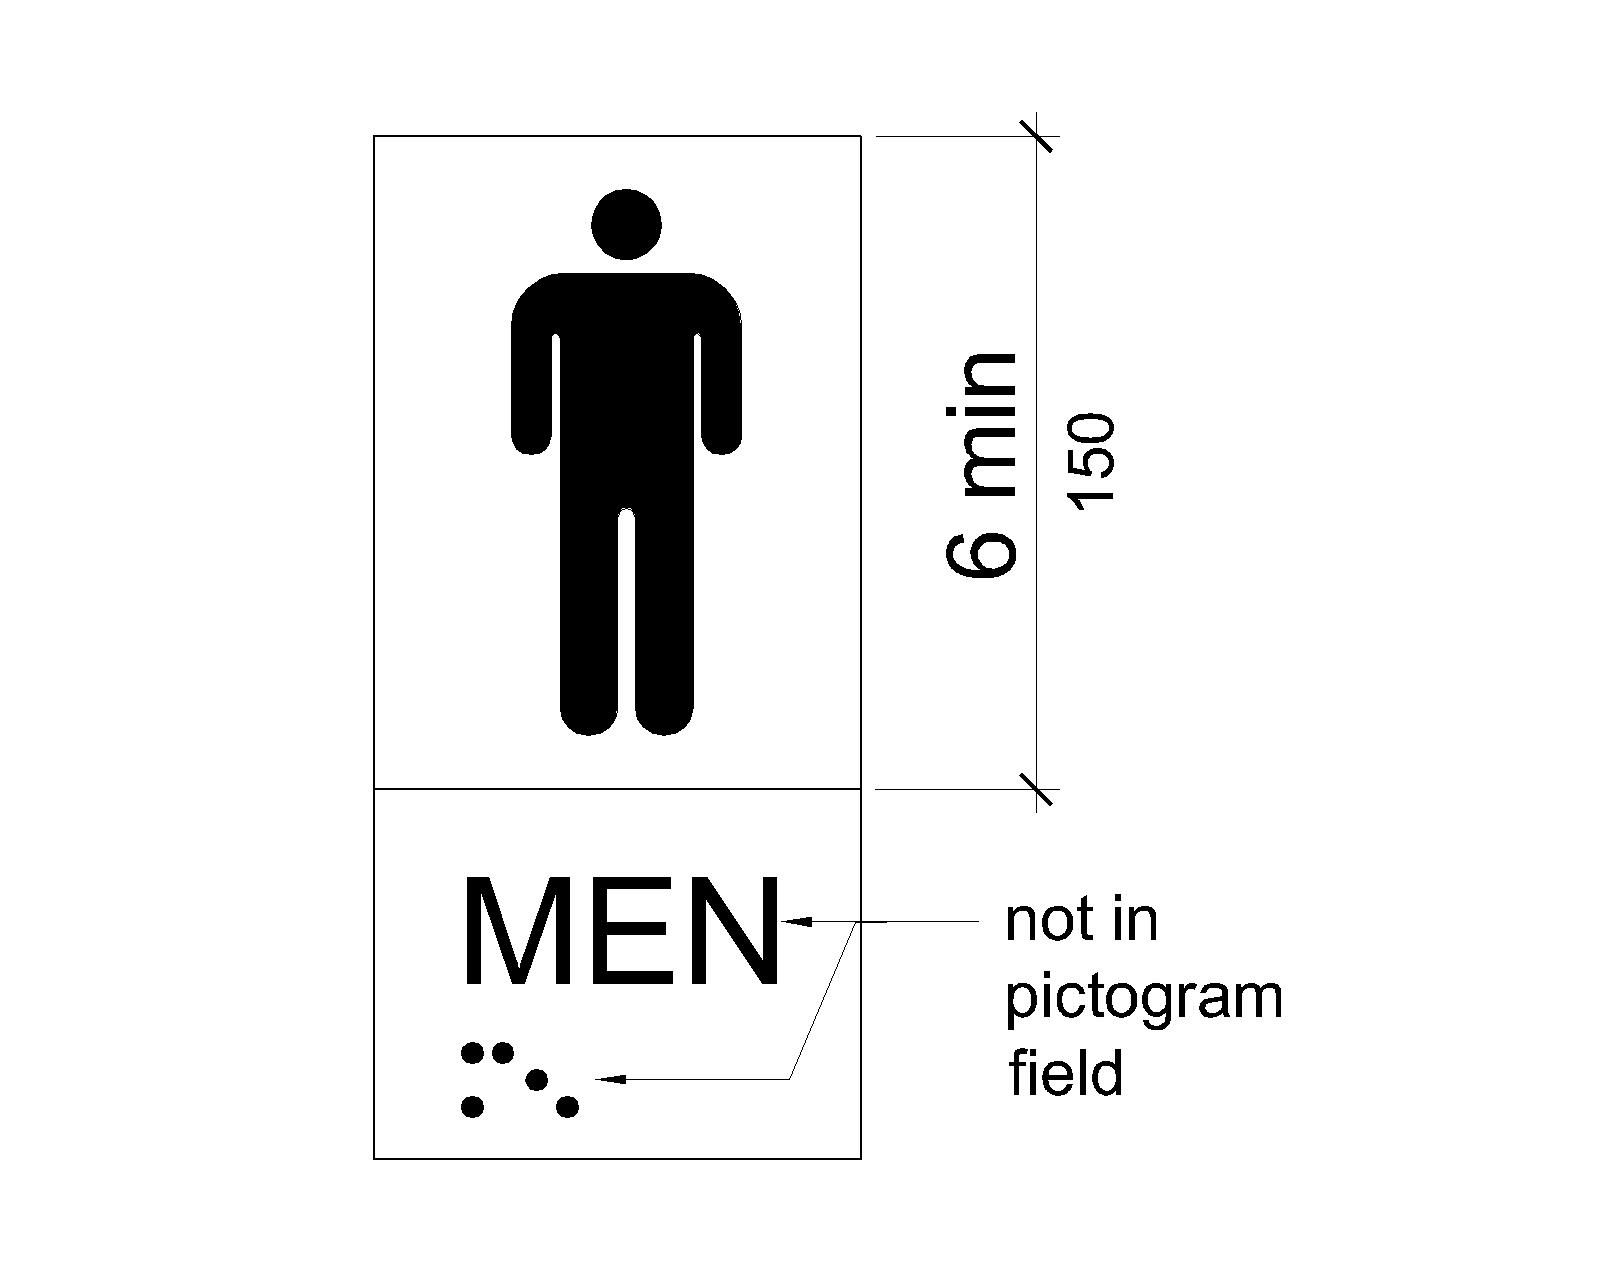 The field height for a men’s room pictogram is shown to be 6 inches (150 mm) minimum.Tactile and Braille characters are located below, outside the pictogram field.